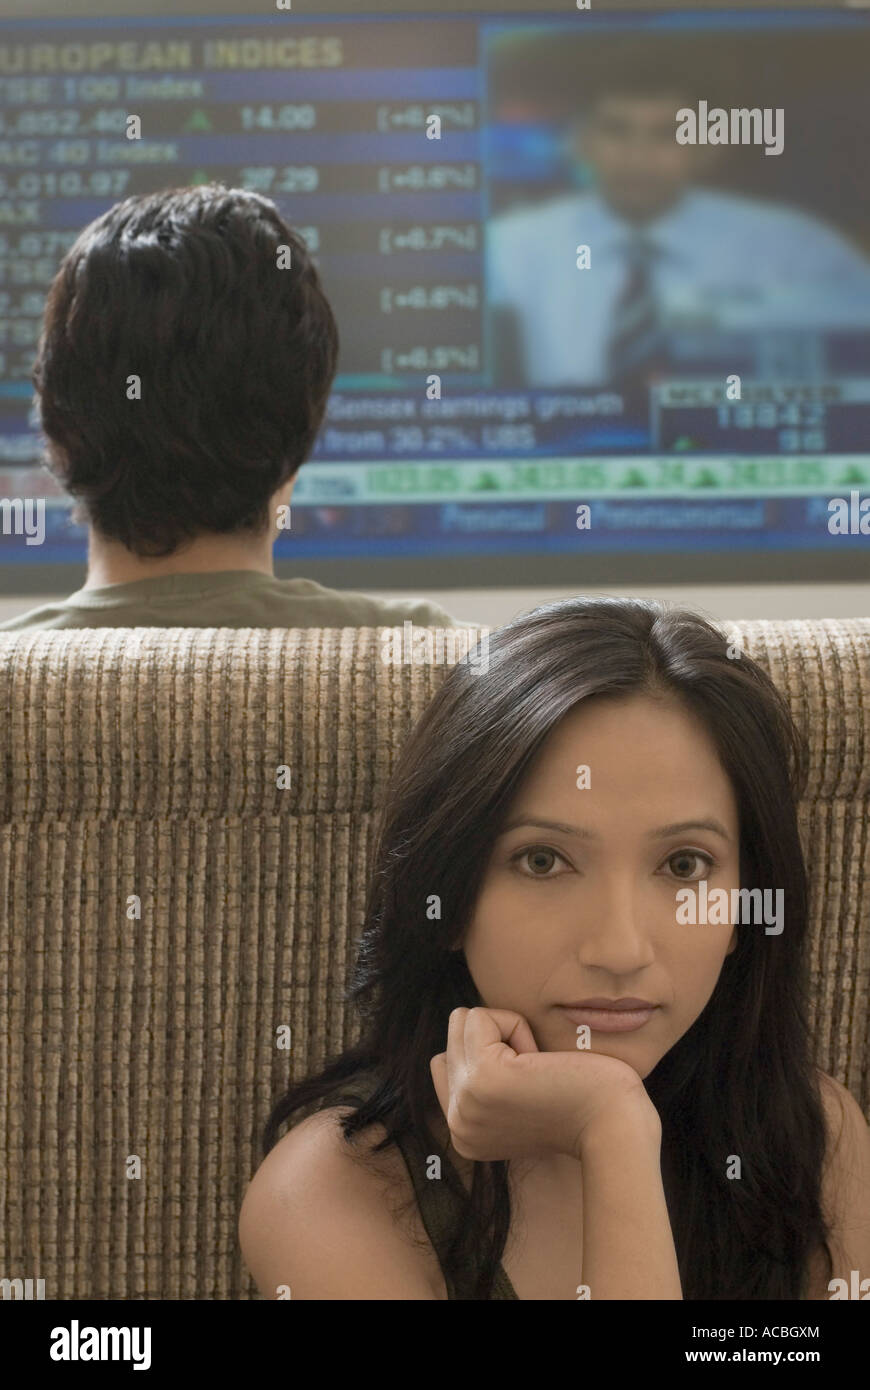 Rear view of a young man watching television with a young woman sitting behind him Stock Photo